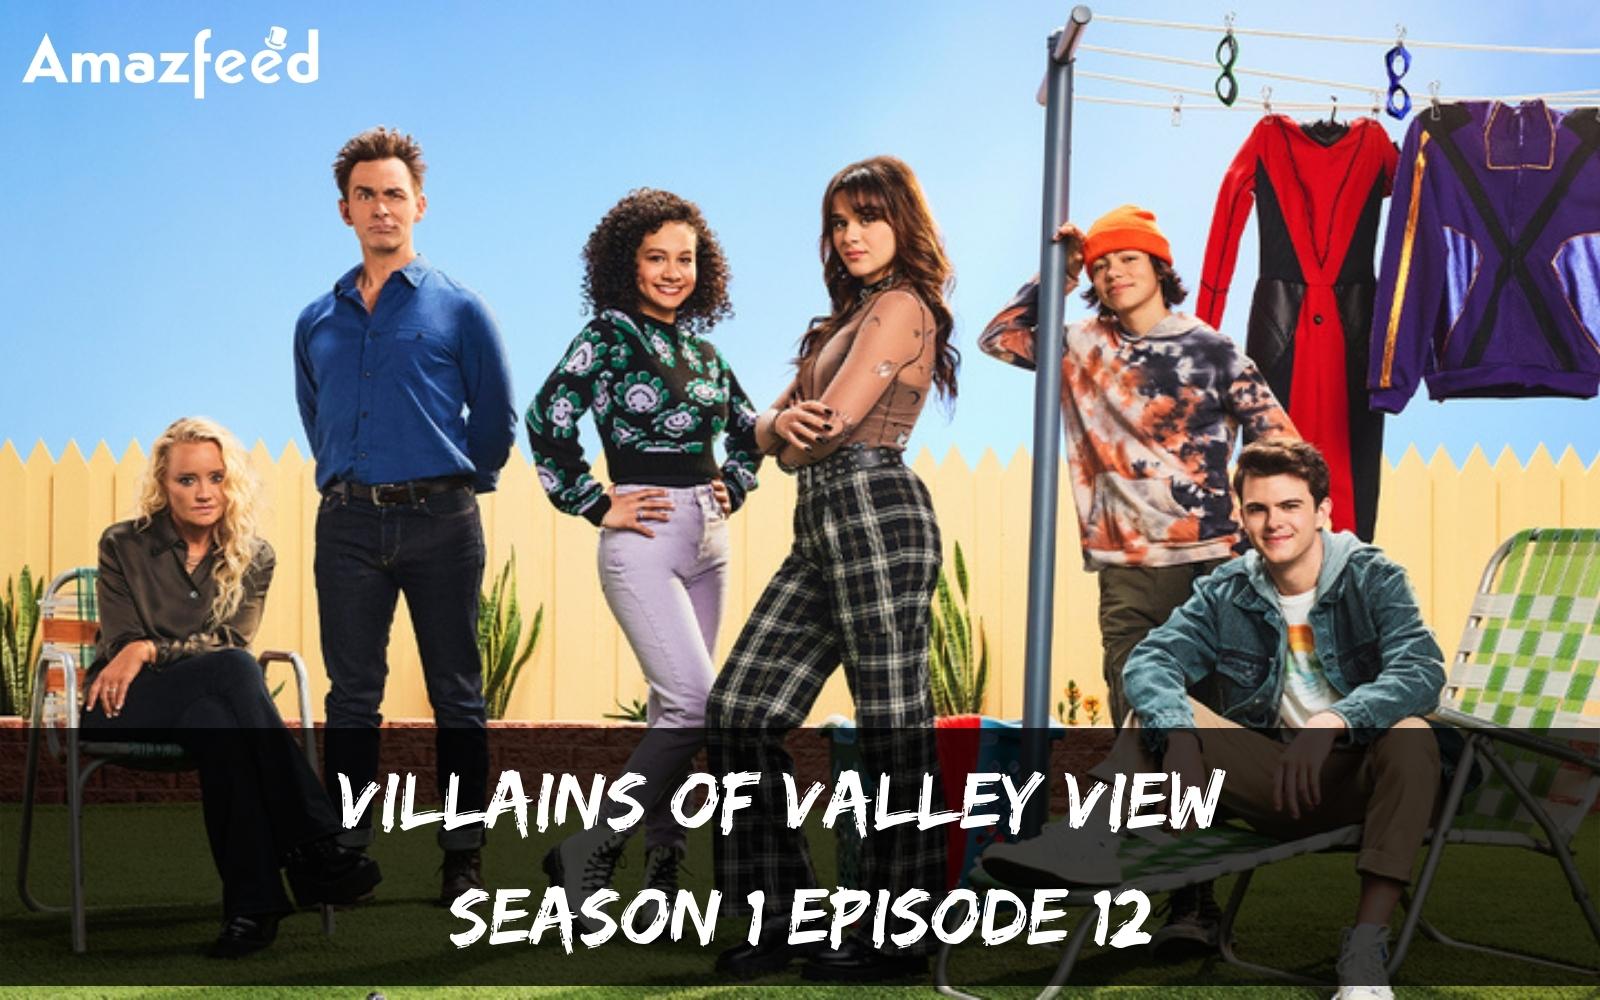 Villains Of Valley View Episode 12: Countdown, Recap, Release Date, Spoilers, Where to Watch & Promo